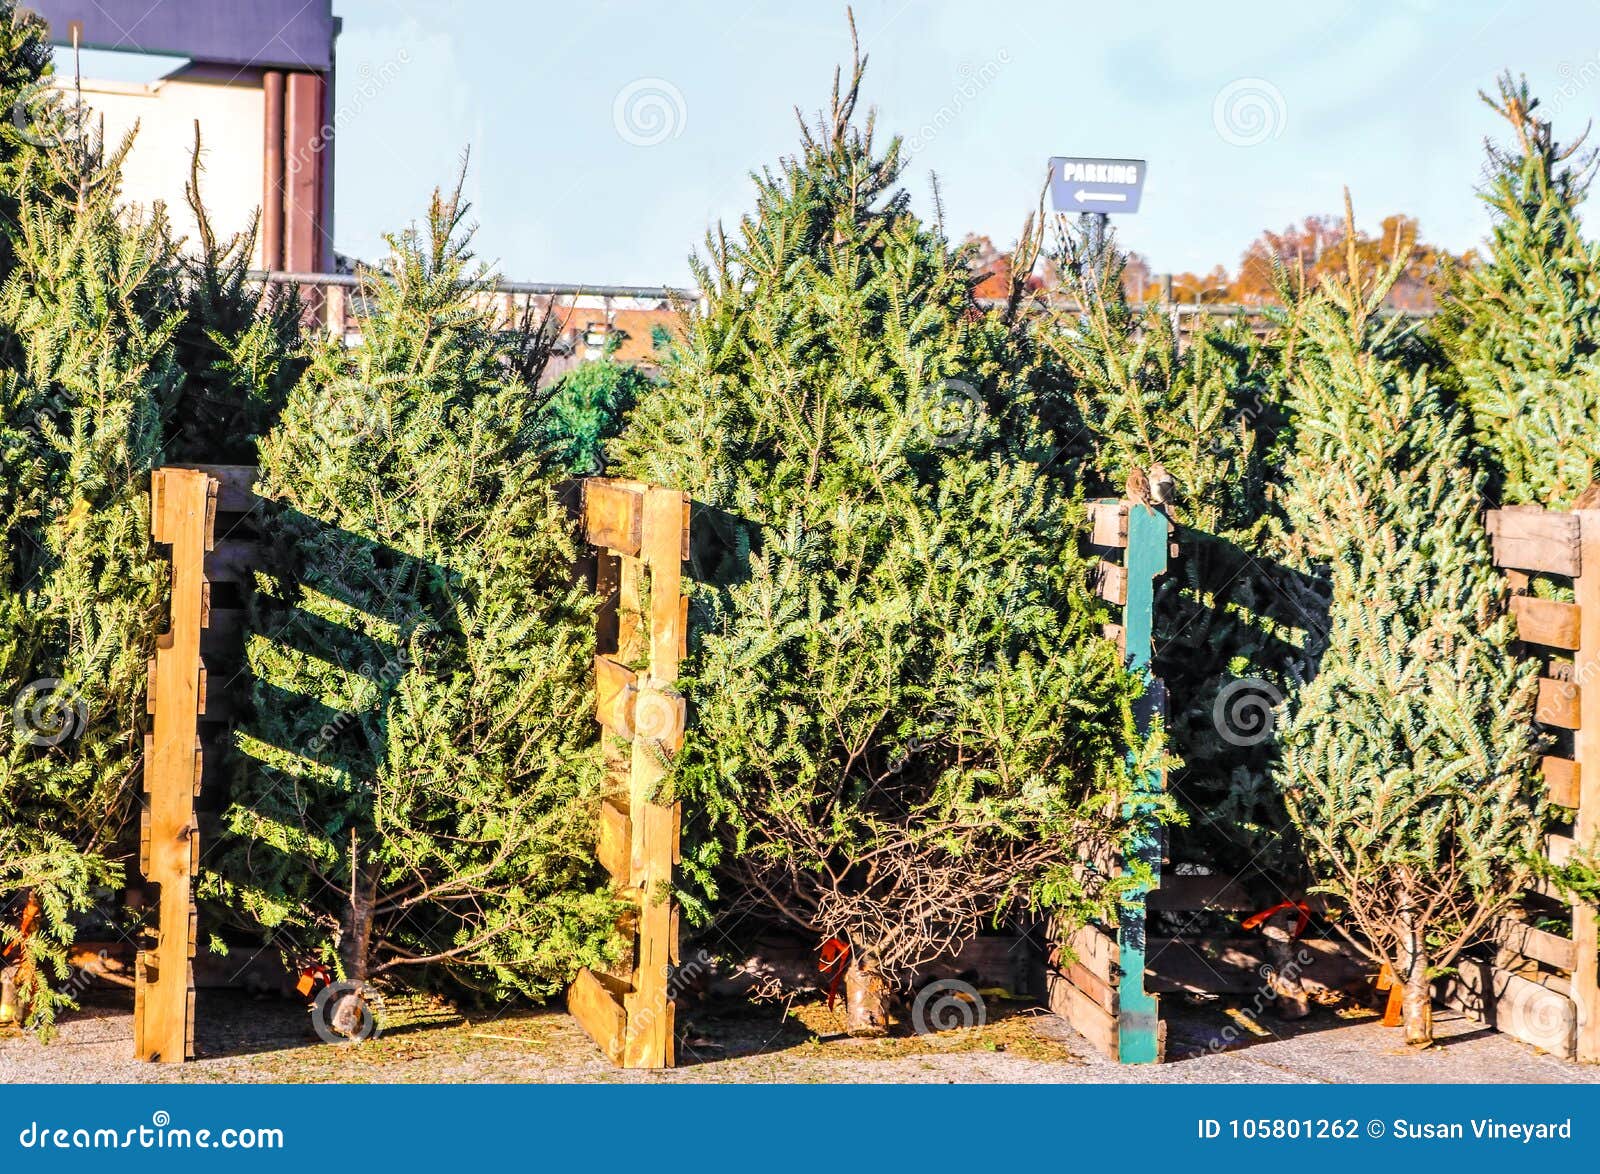 Live Christmas Trees For Sale In A City Lot Arranged According To Size And Type Stock Photo ...